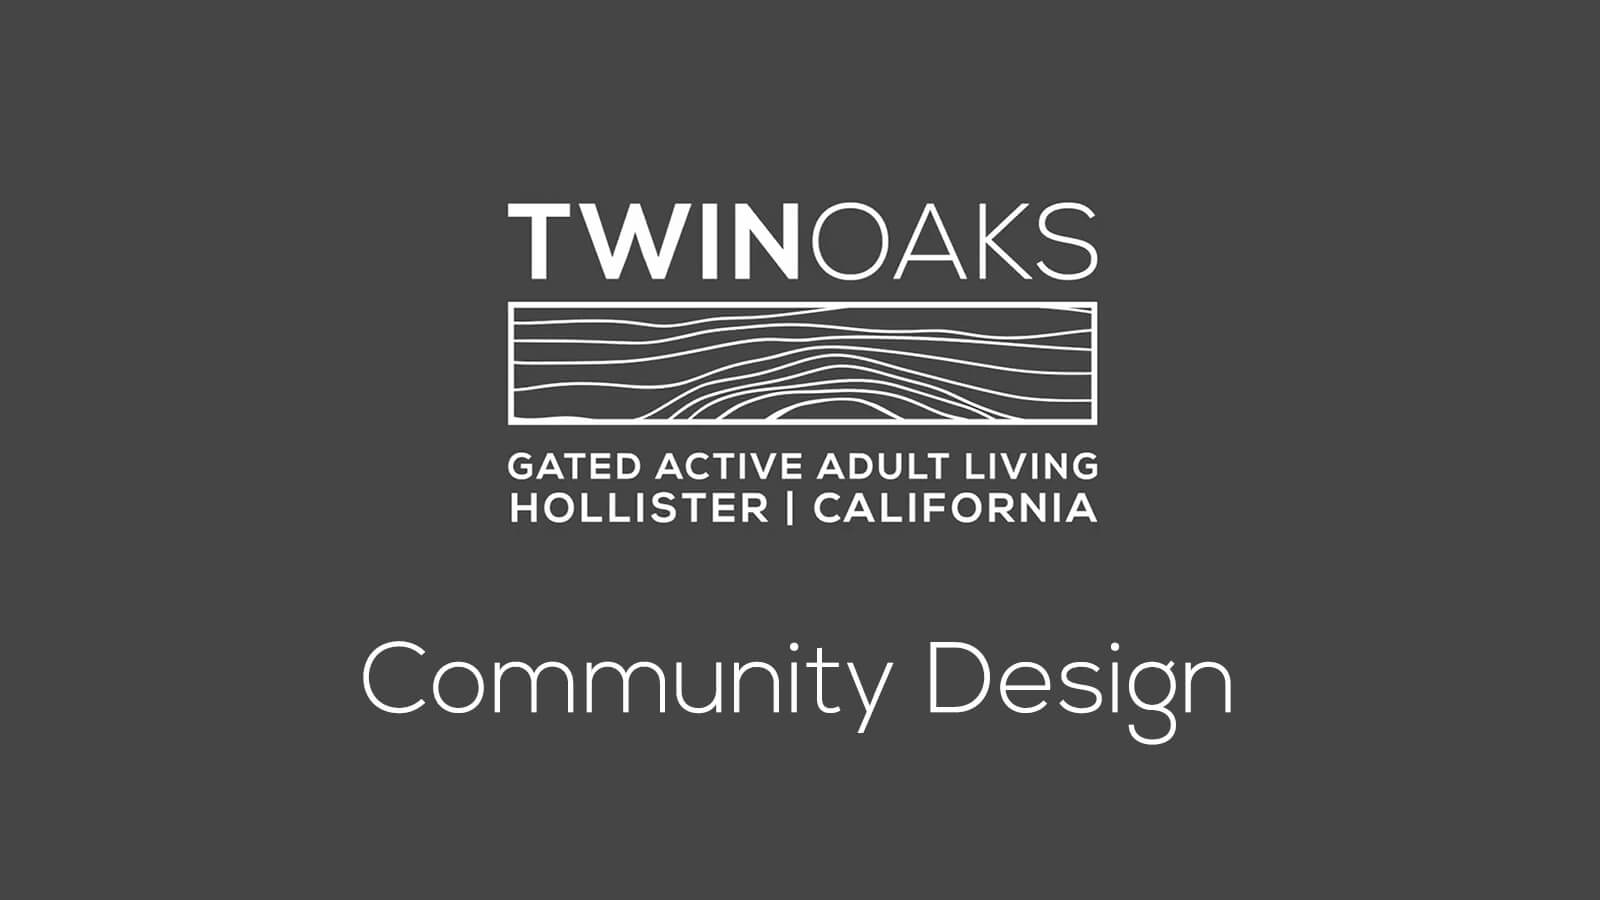 Video: Twin Oaks gated active adult living - Community Design